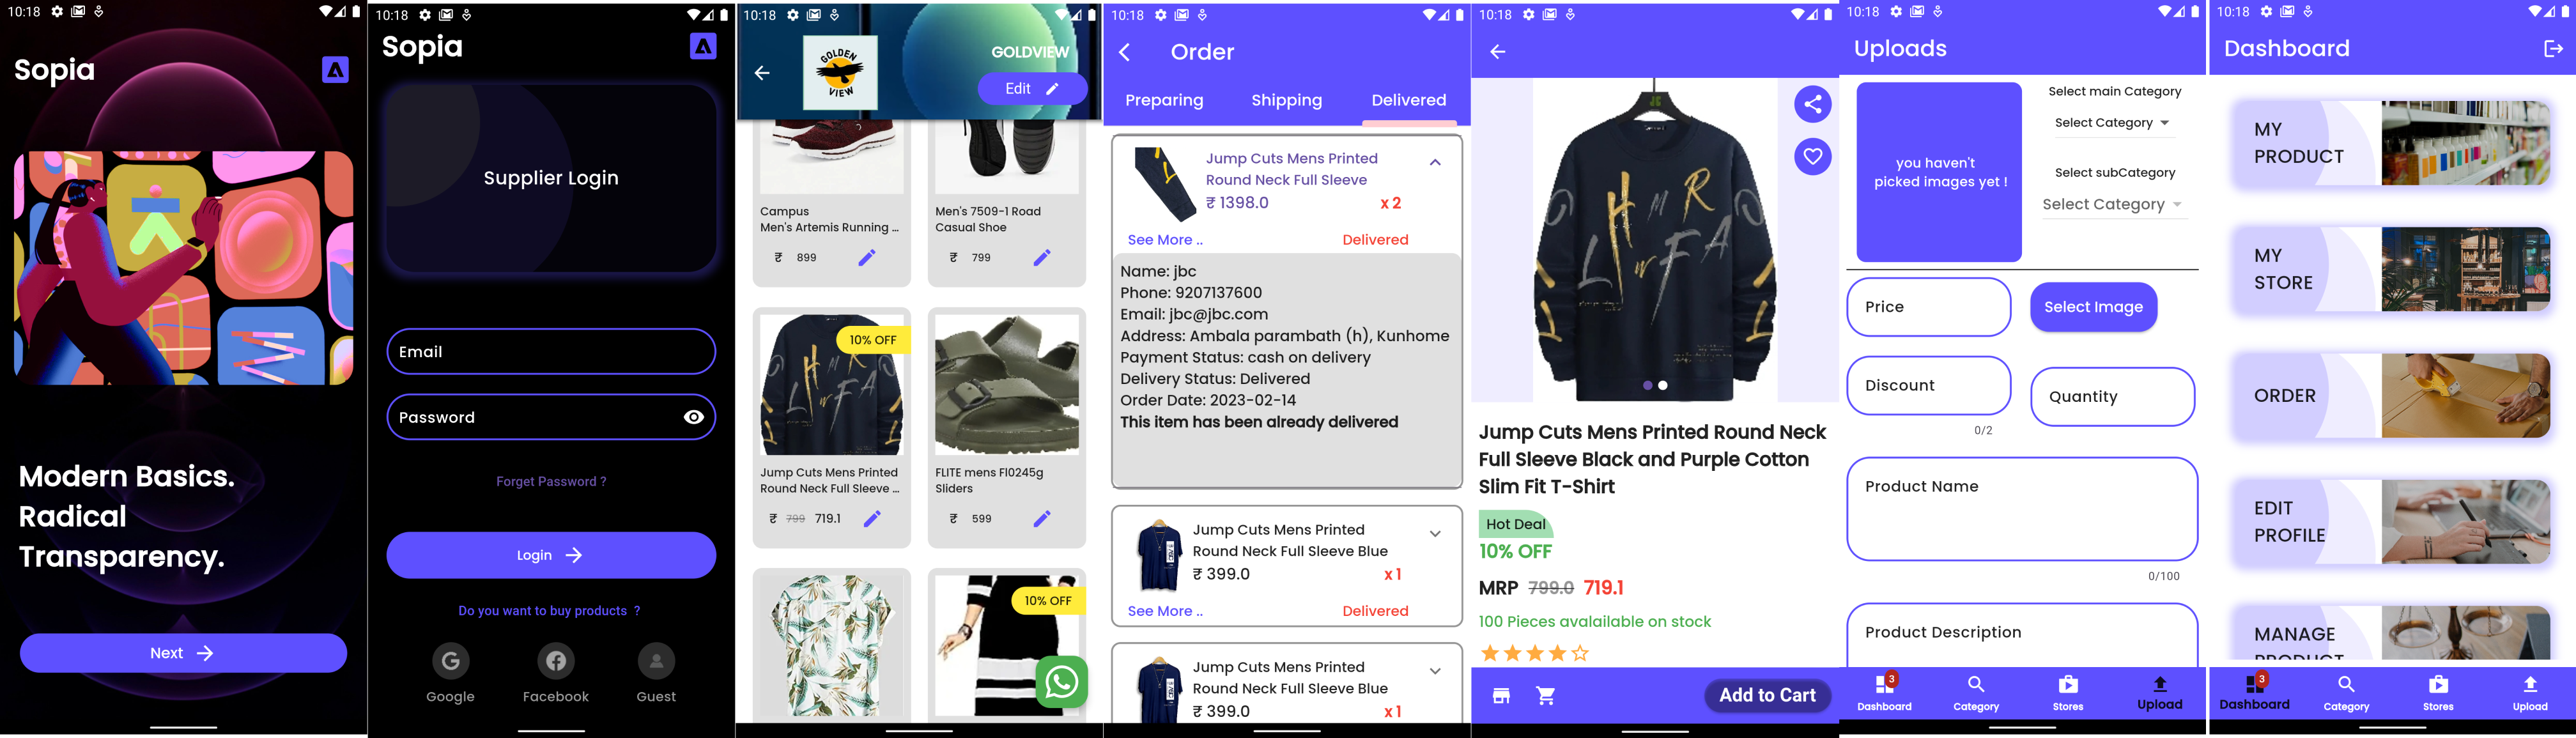 Multistore application made using flutter and firebase